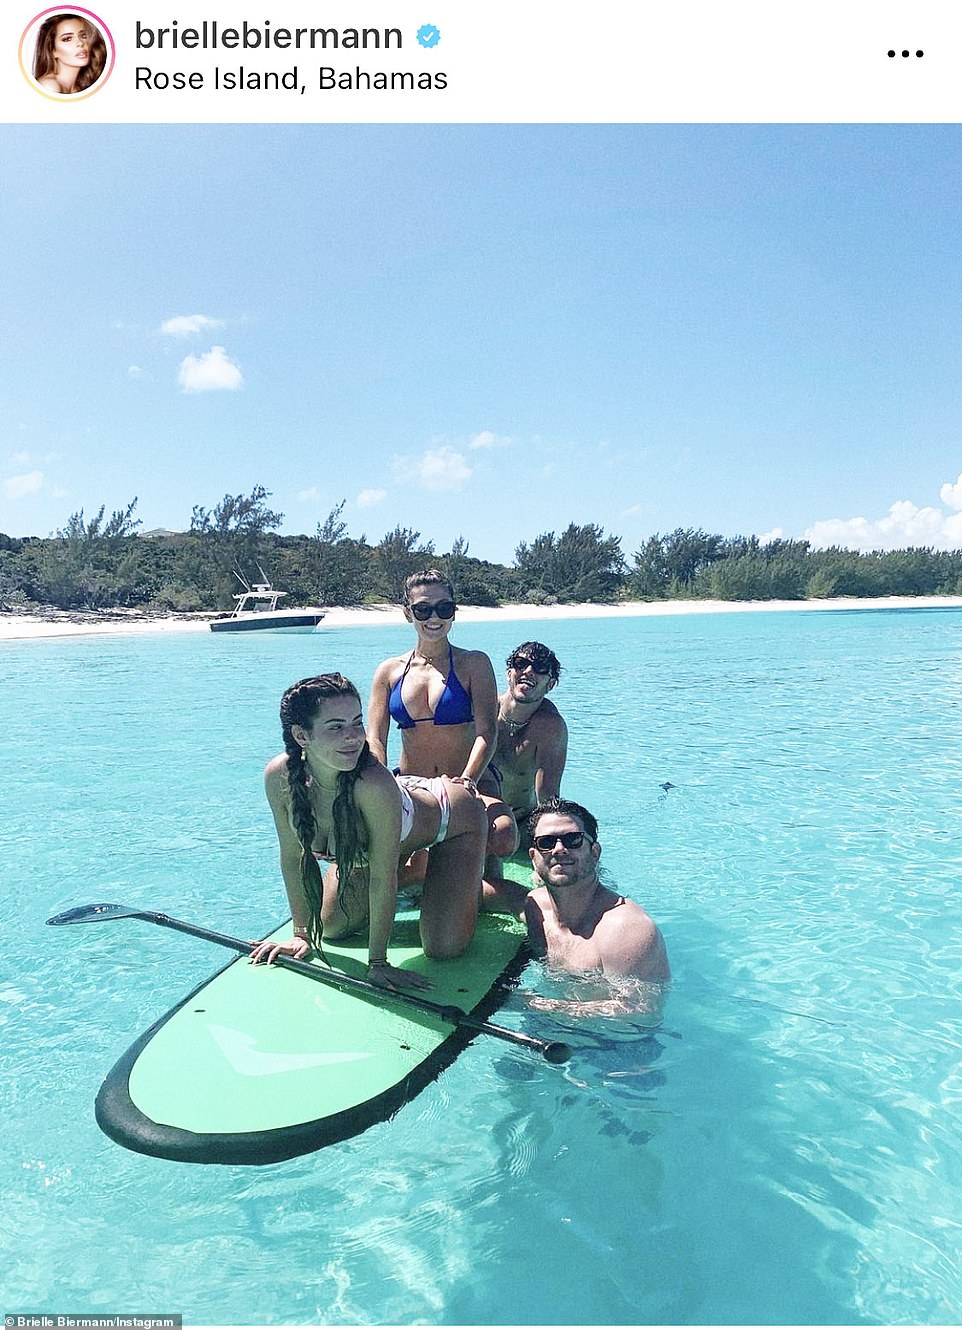 Sassy talk: The young model said in her caption: 'Photo dump of our boat day in the Bahamas☀ *it’s the video of tommy saying he’ll “stabilize this b**ch” by holding on to my ass for me*'